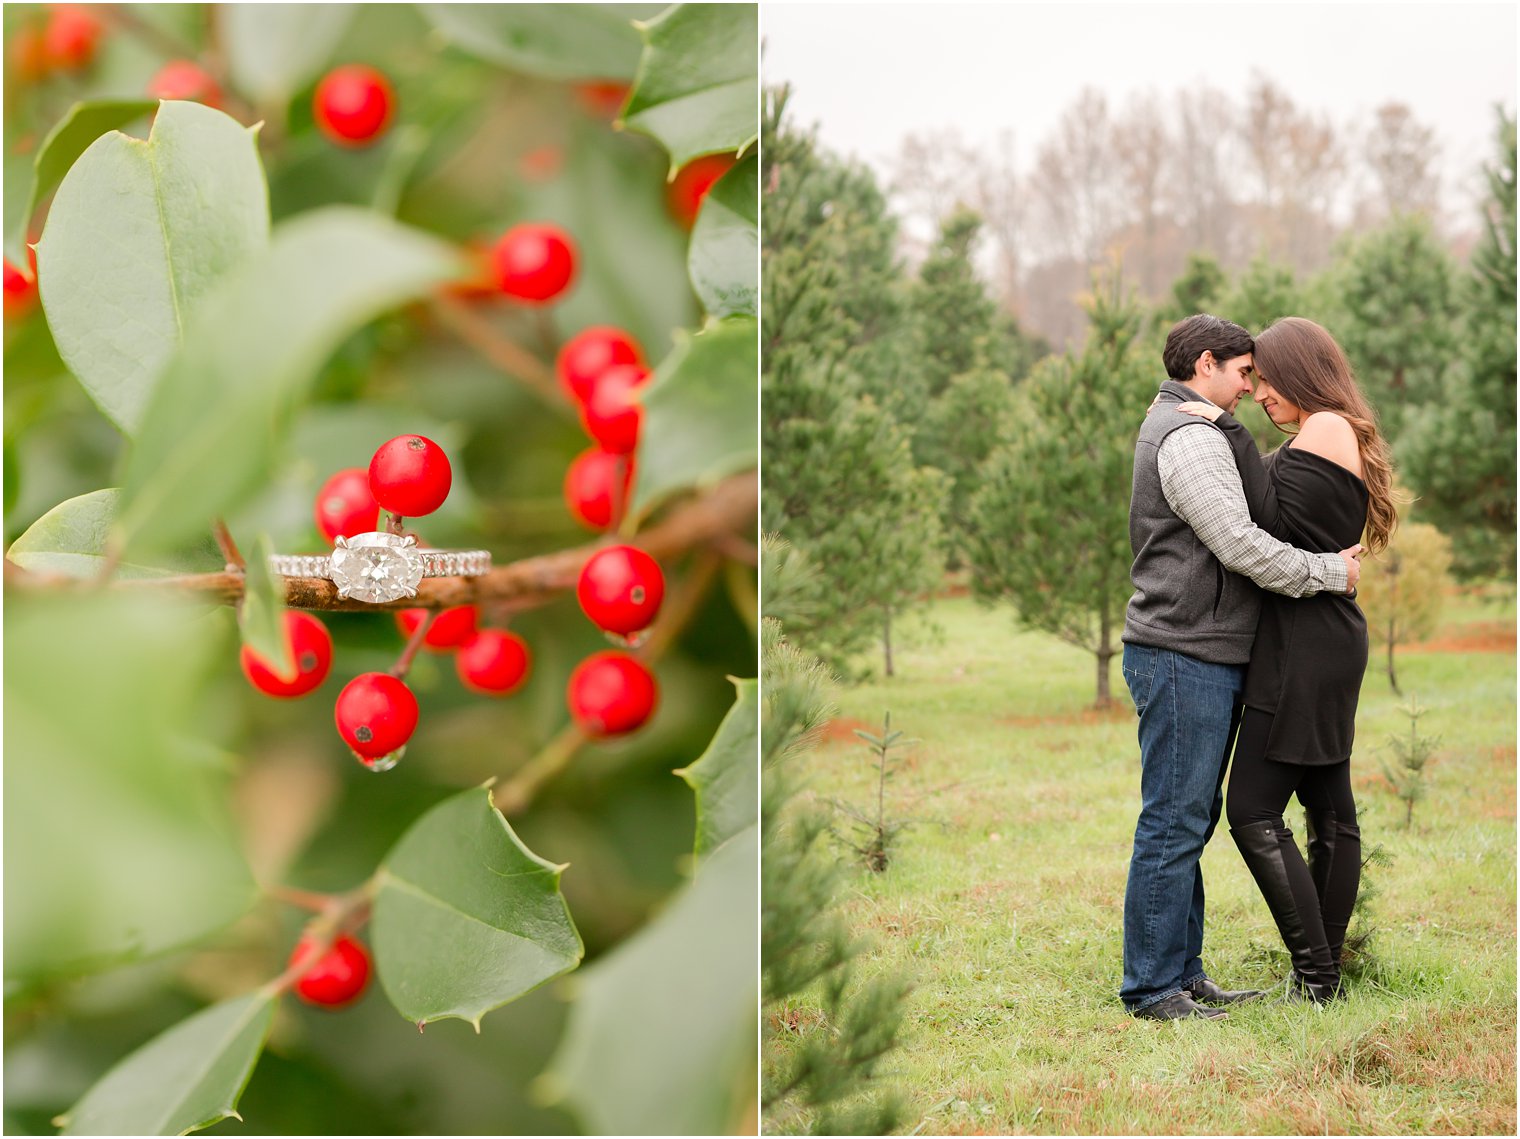 Christmas Tree Farm Engagement Photo Ideas with ring on holly tree